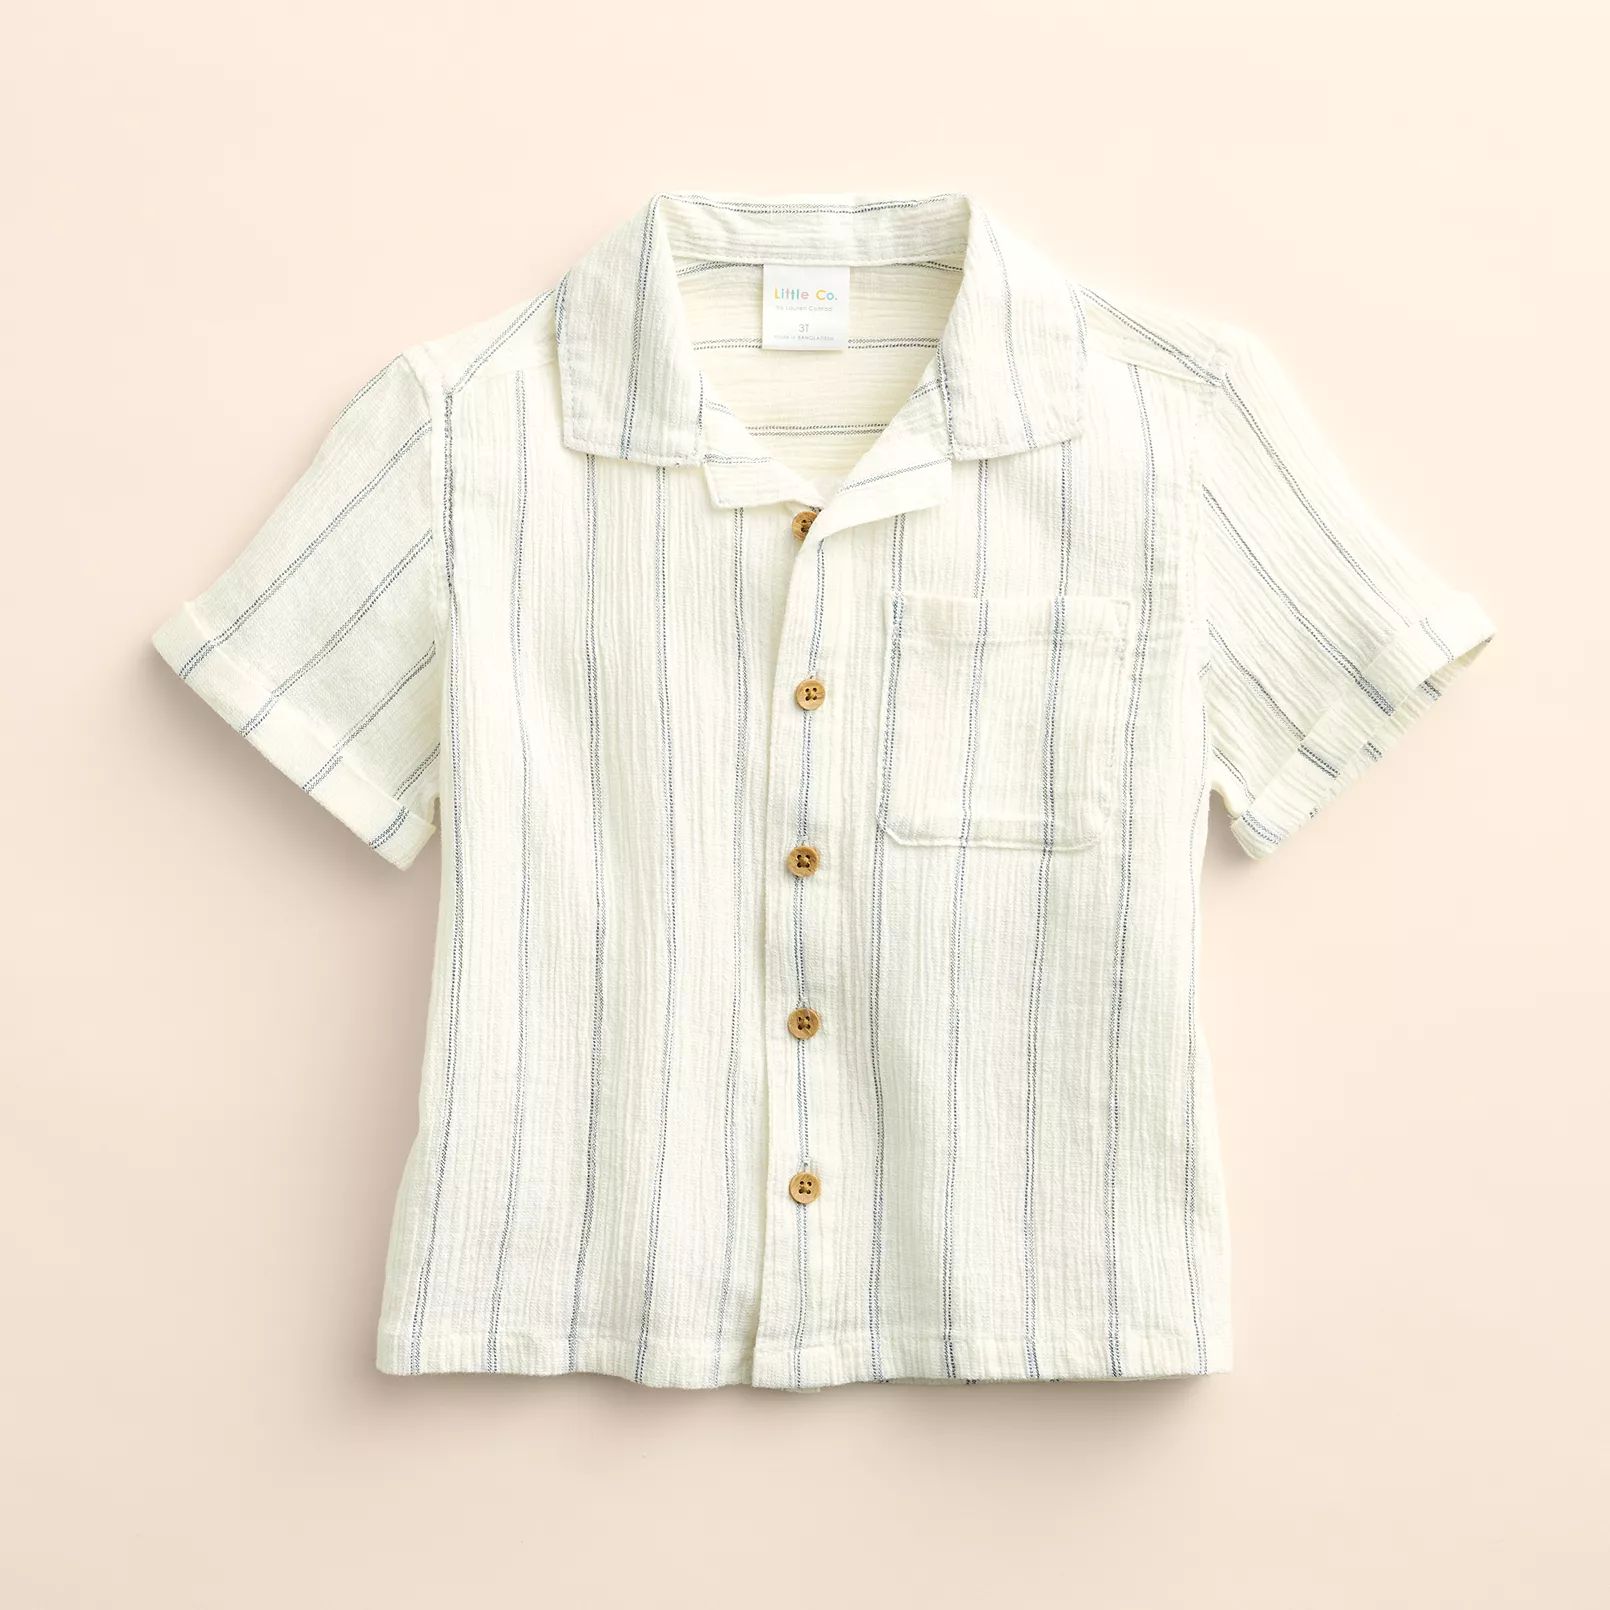 Baby & Toddler Little Co. by Lauren Conrad Organic Button-Up Shirt | Kohl's